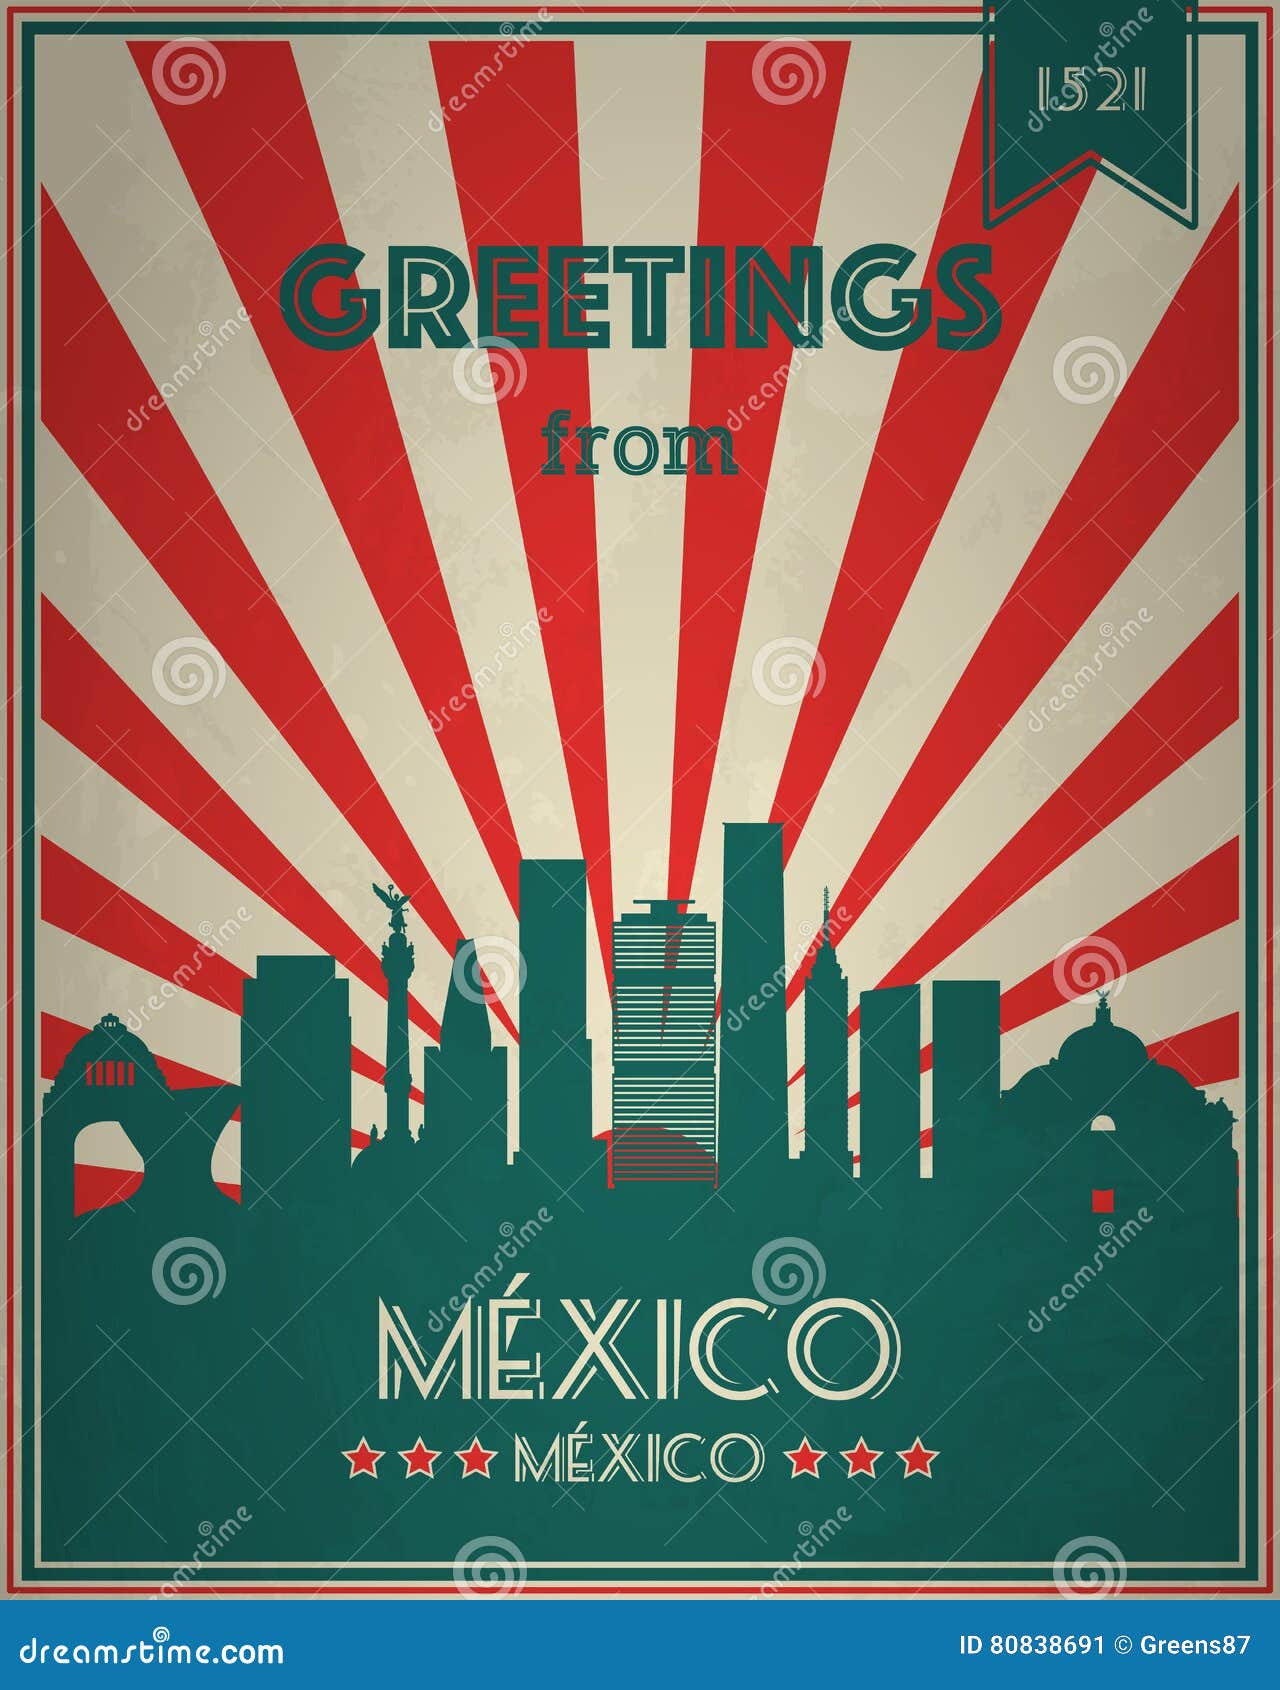 vintage touristic greeting card - mexico.